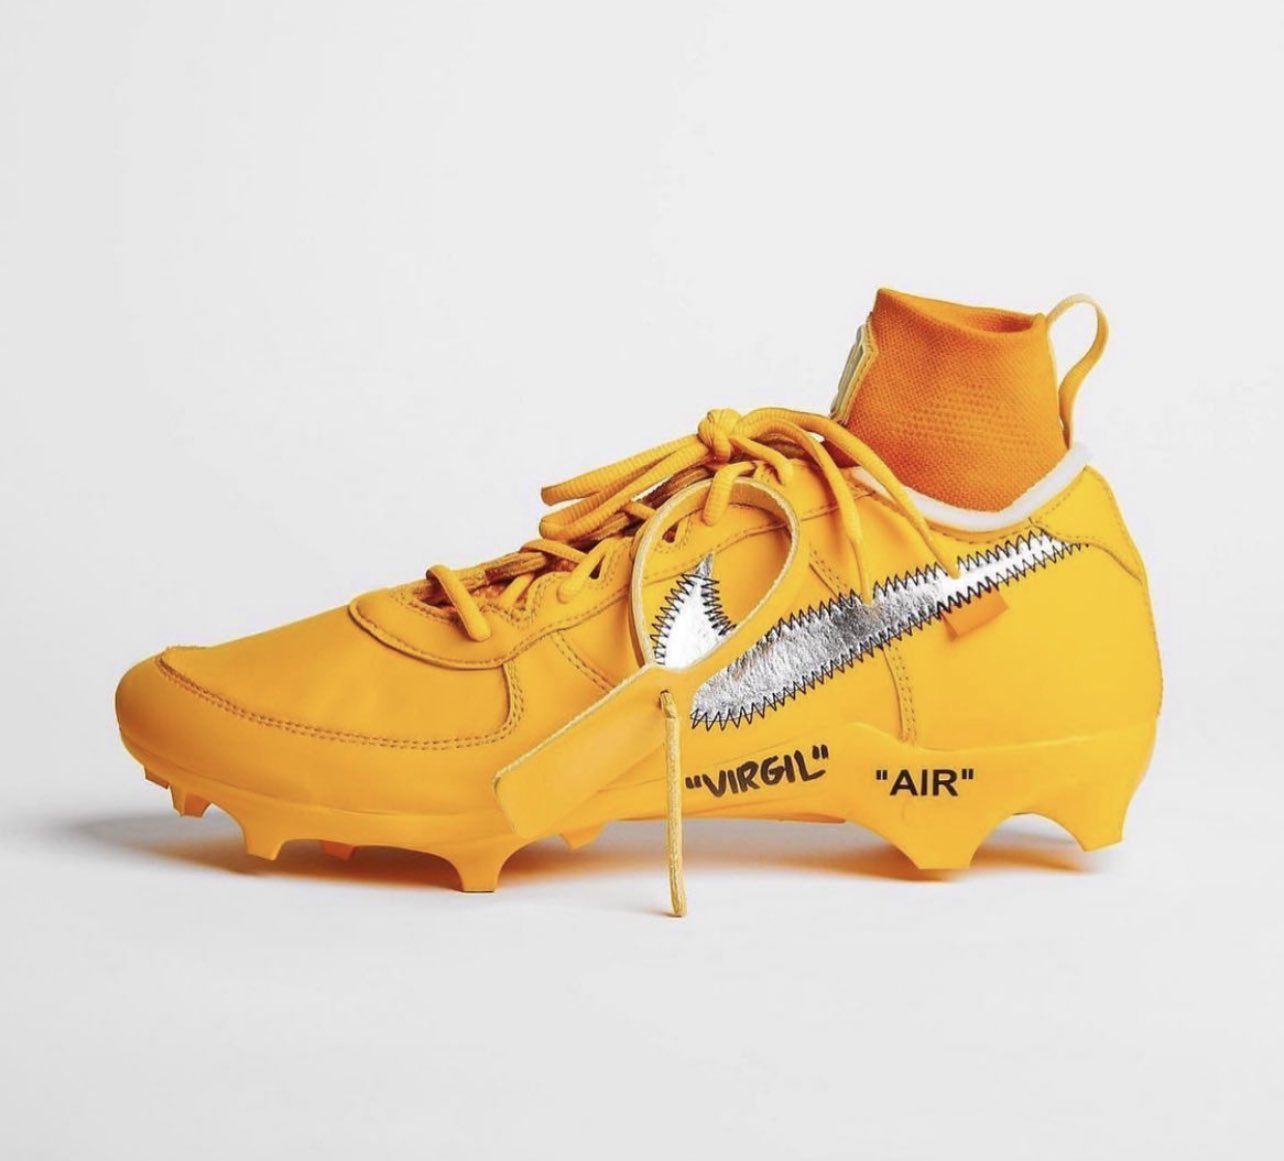 Shoe Surgeon Pays Tribute To Virgil Abloh With Custom Louis